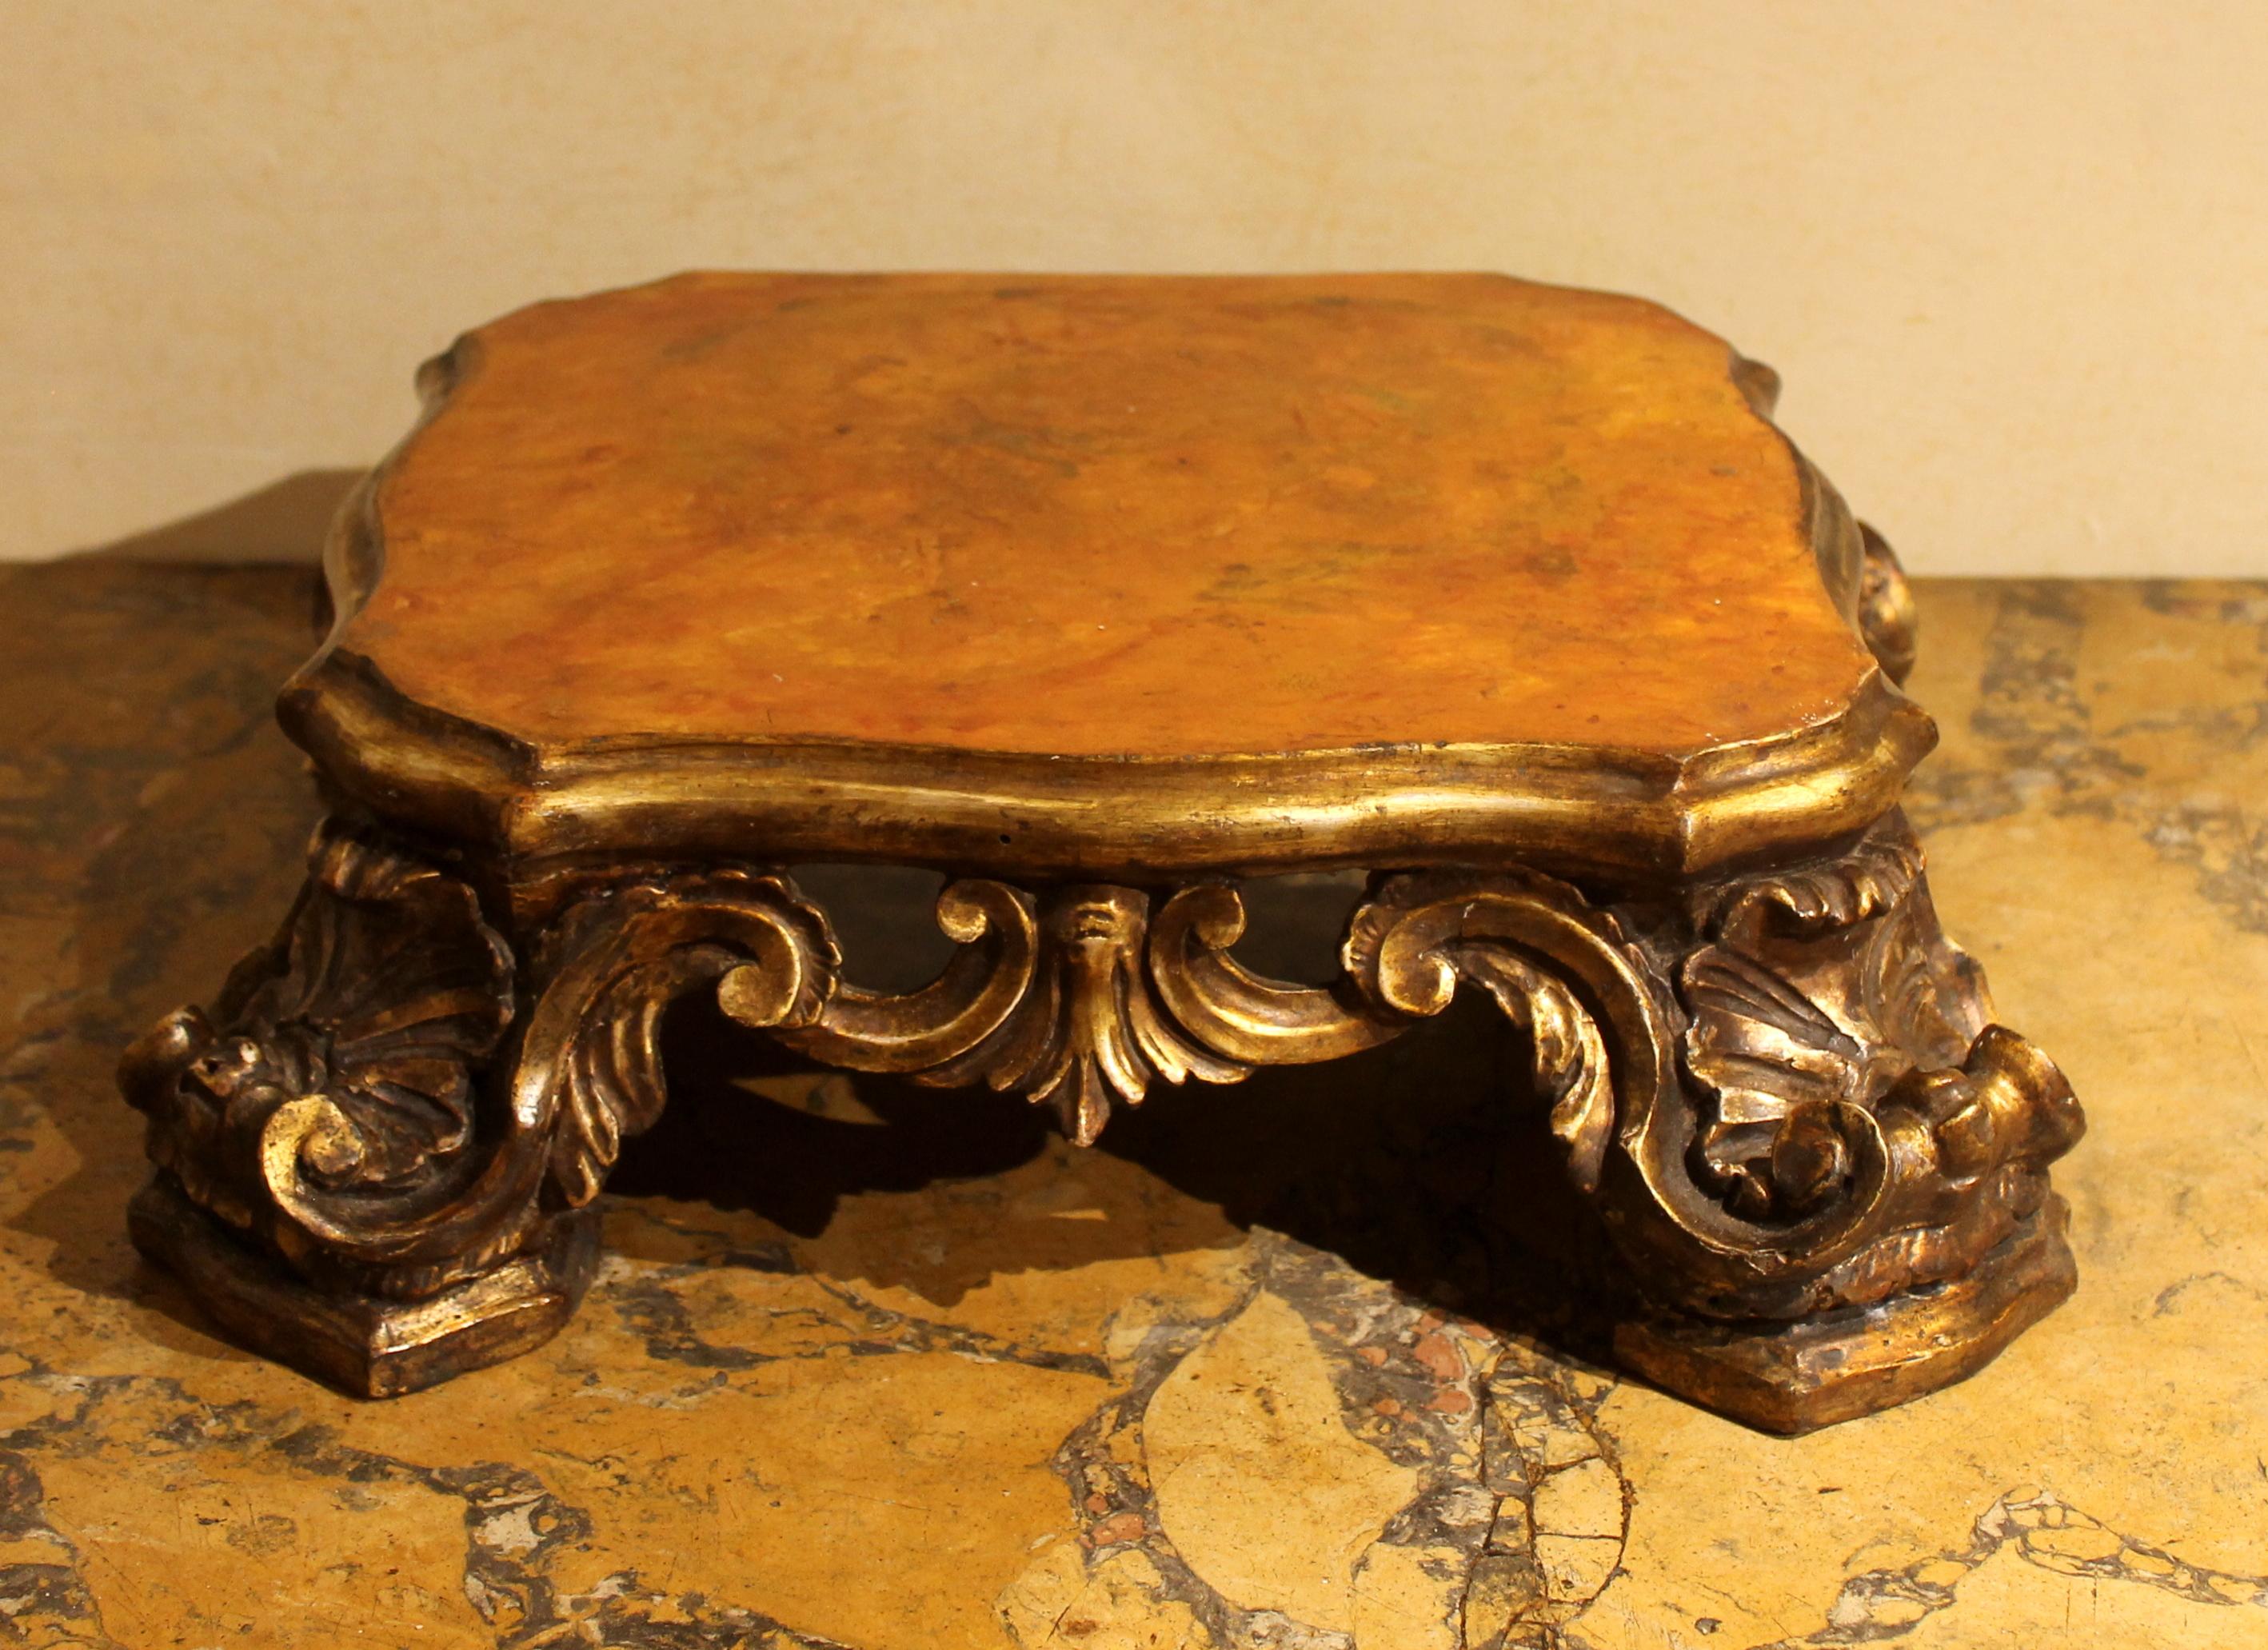 This extremely beautiful entirely hand carved, gilded and lacquered wooden base belongs to the Roman Baroque period. 
This antique pedestal from the 1600s has a beautiful shape, the lacquered faux marble top in orange-yellow to ocher tones rests on